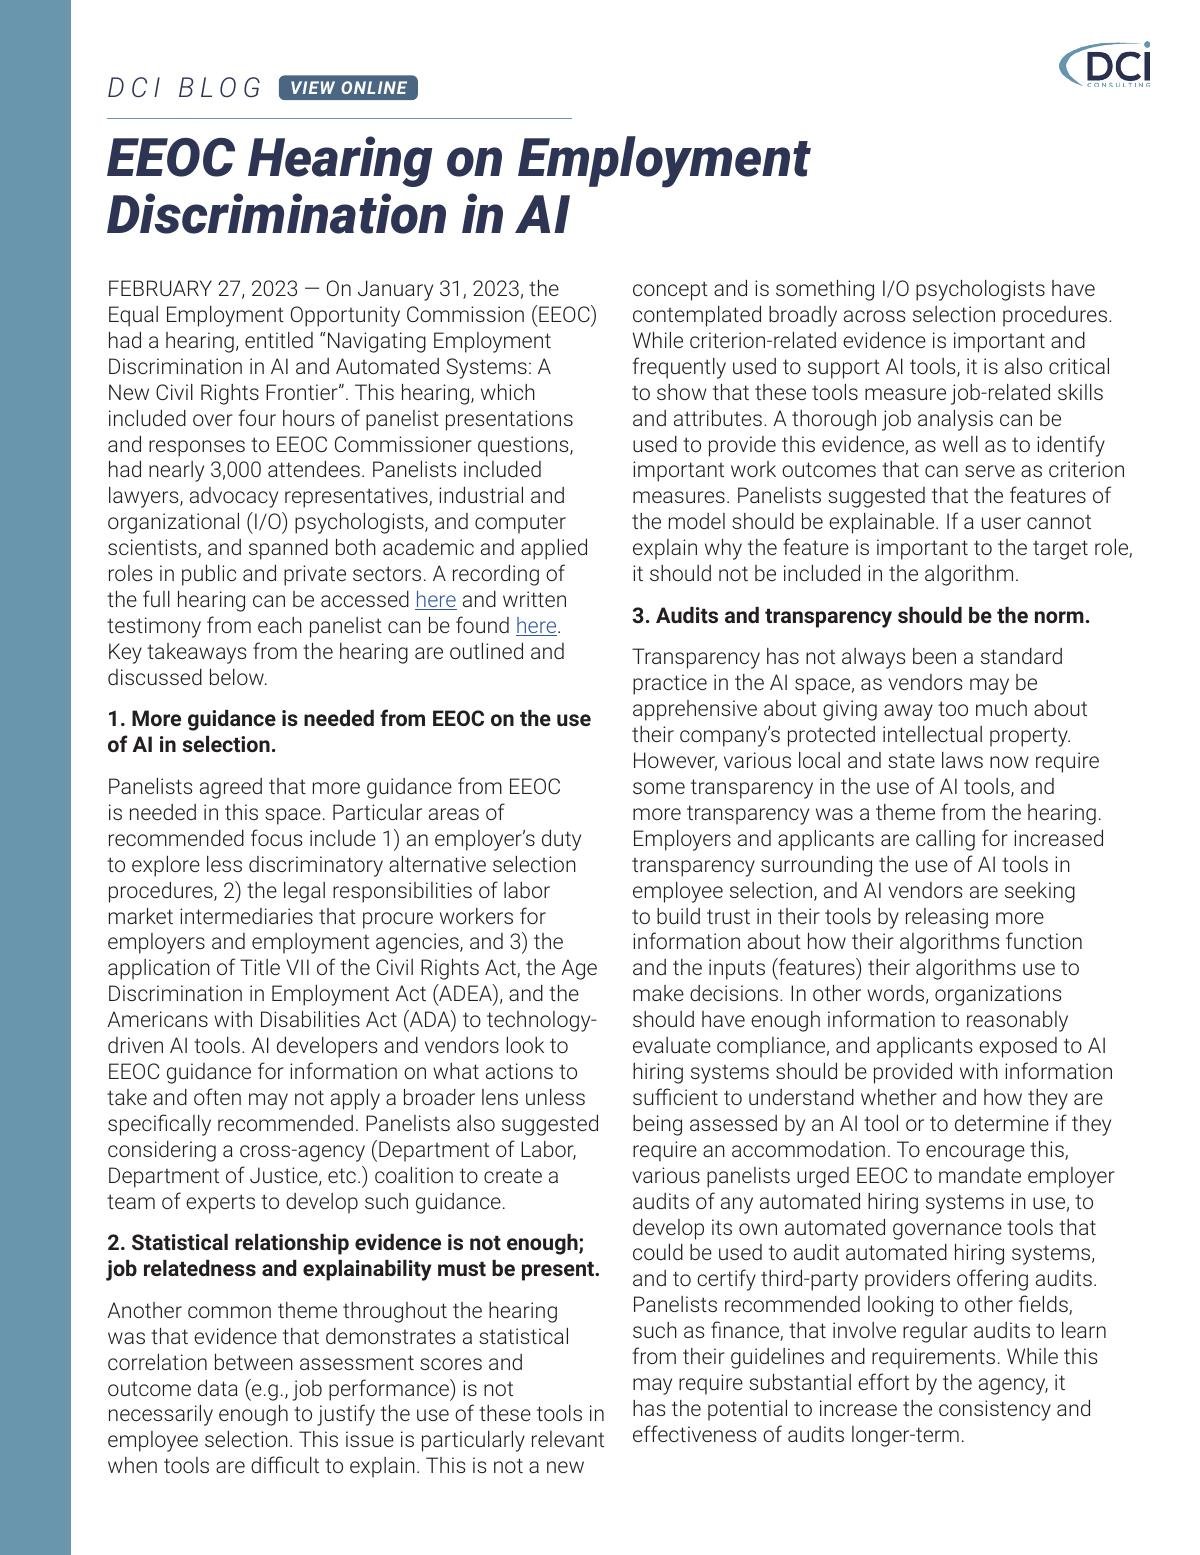 EEOC Hearing on Employment Discrimination in AI 